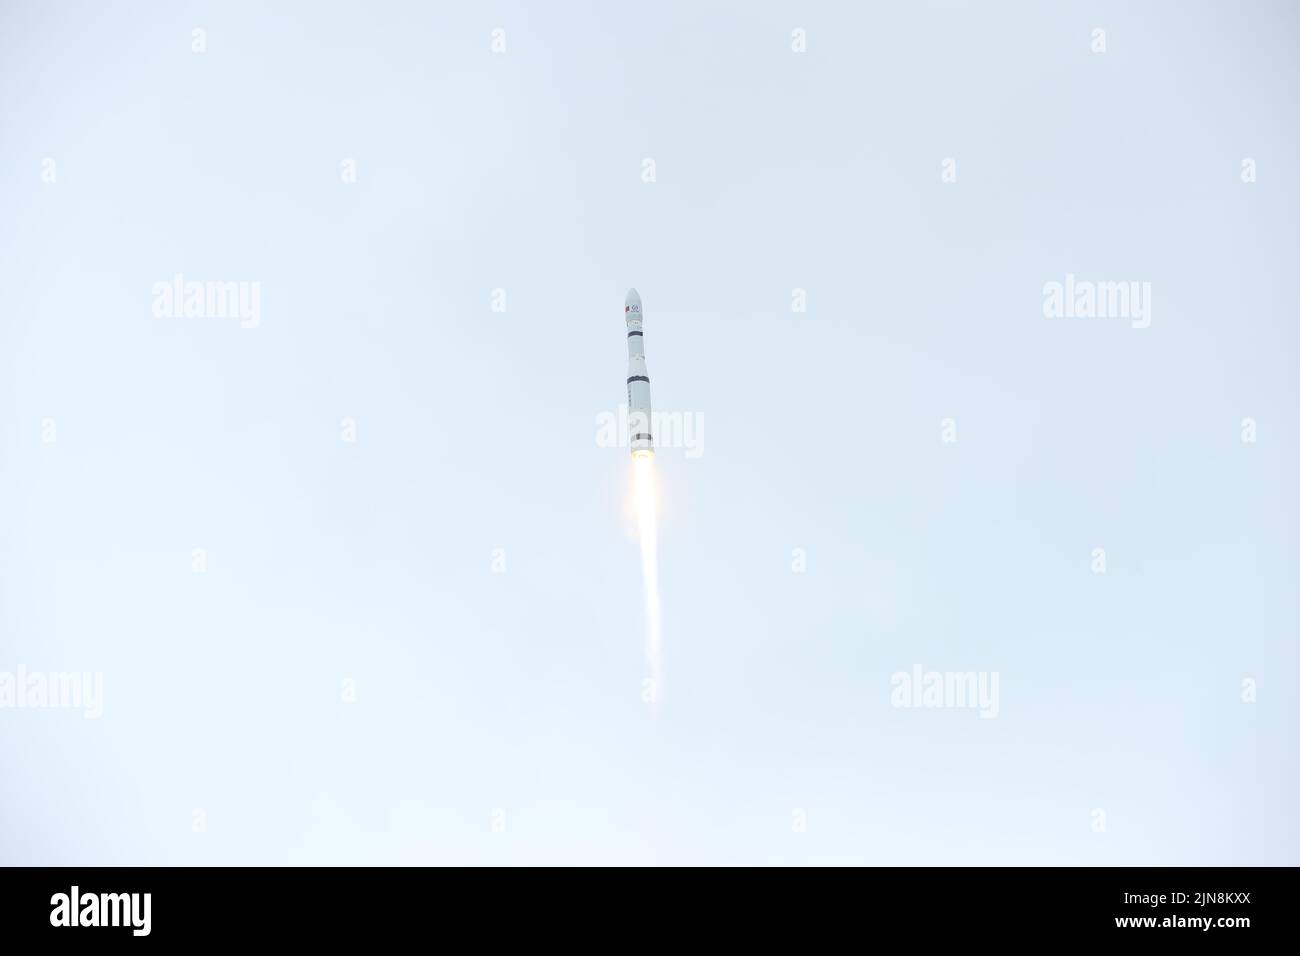 Taiyuan. 10th Aug, 2022. A Long March-6 carrier rocket carrying 16 new satellites blasts off from the Taiyuan Satellite Launch Center in north China's Shanxi Province on Aug. 10, 2022. The satellites, including a Jilin-1 Gaofen 03D09 satellite and Yunyao-1 04-08 satellites, were launched at 12:50 p.m. Beijing Time (0450 GMT) and entered the planned orbit successfully. Credit: Zheng Bin/Xinhua/Alamy Live News Stock Photo